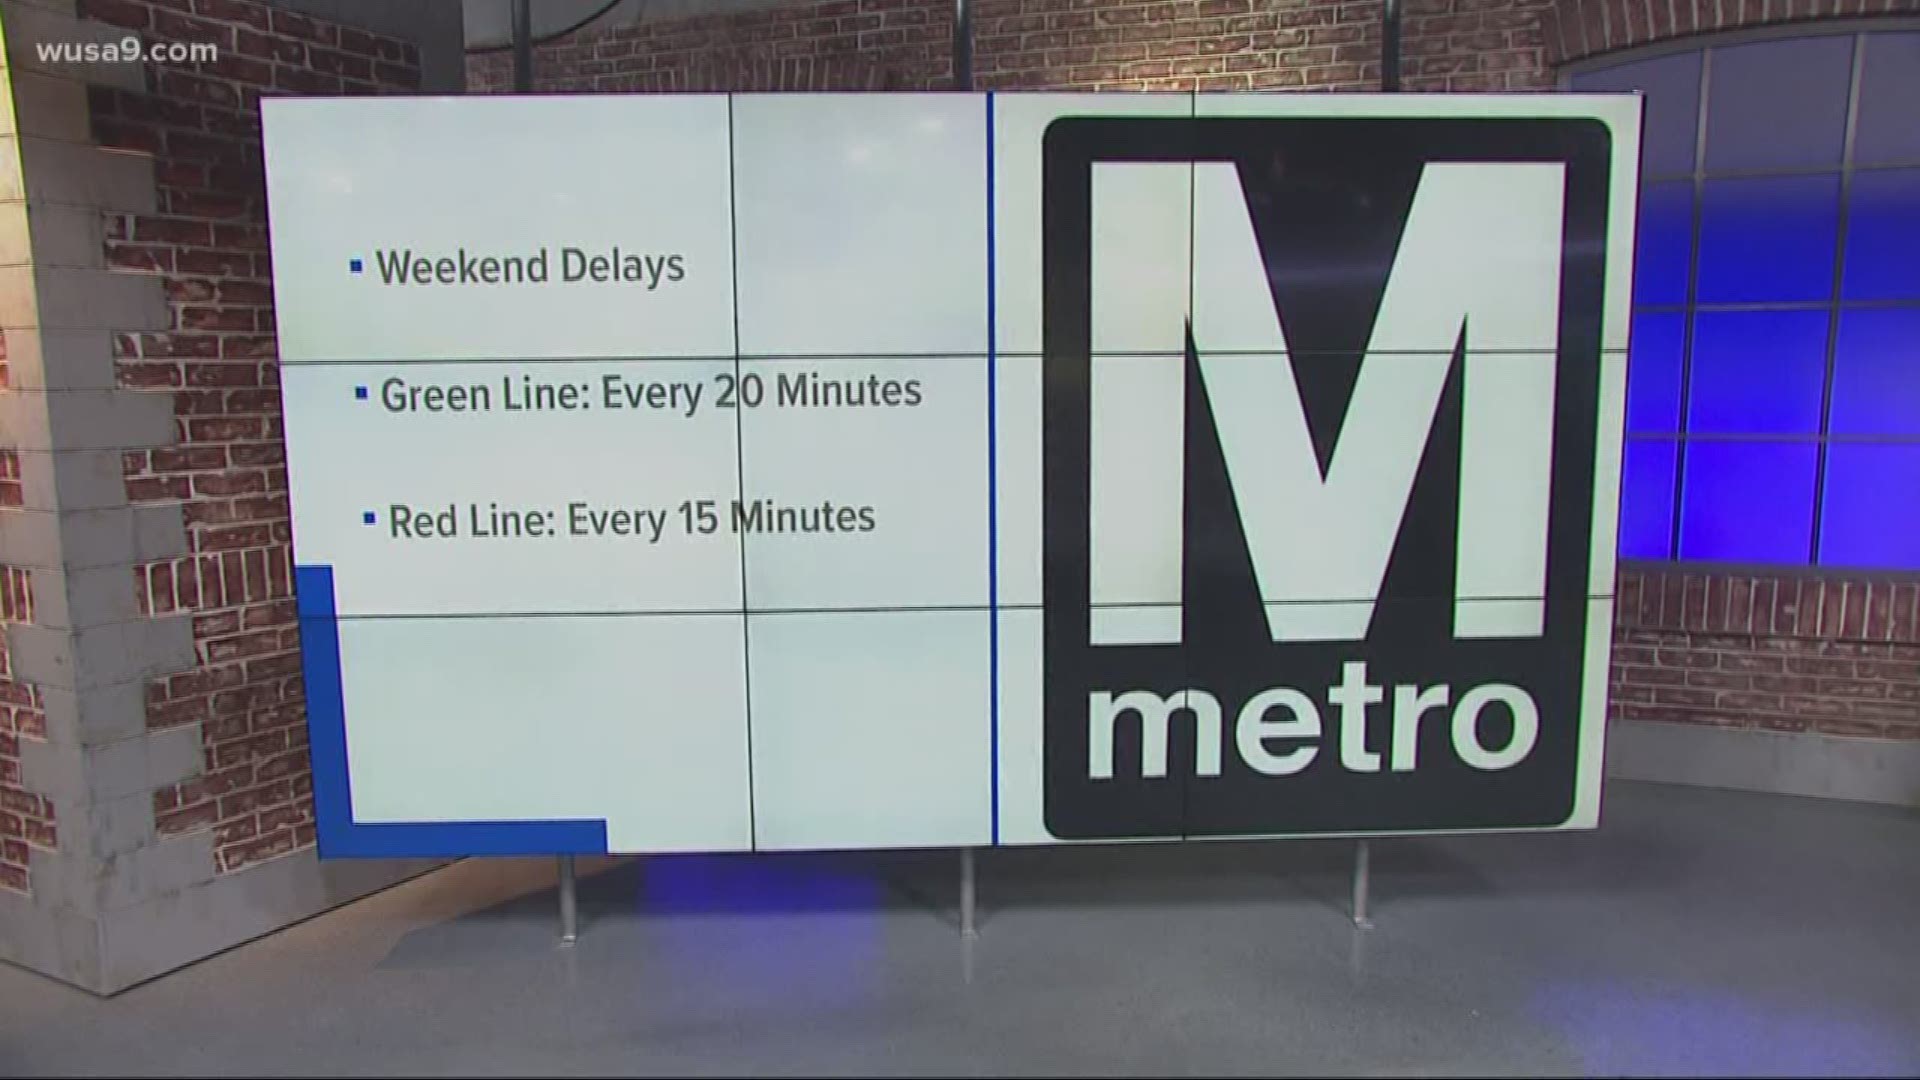 Expect Metro to run on delays this weekend